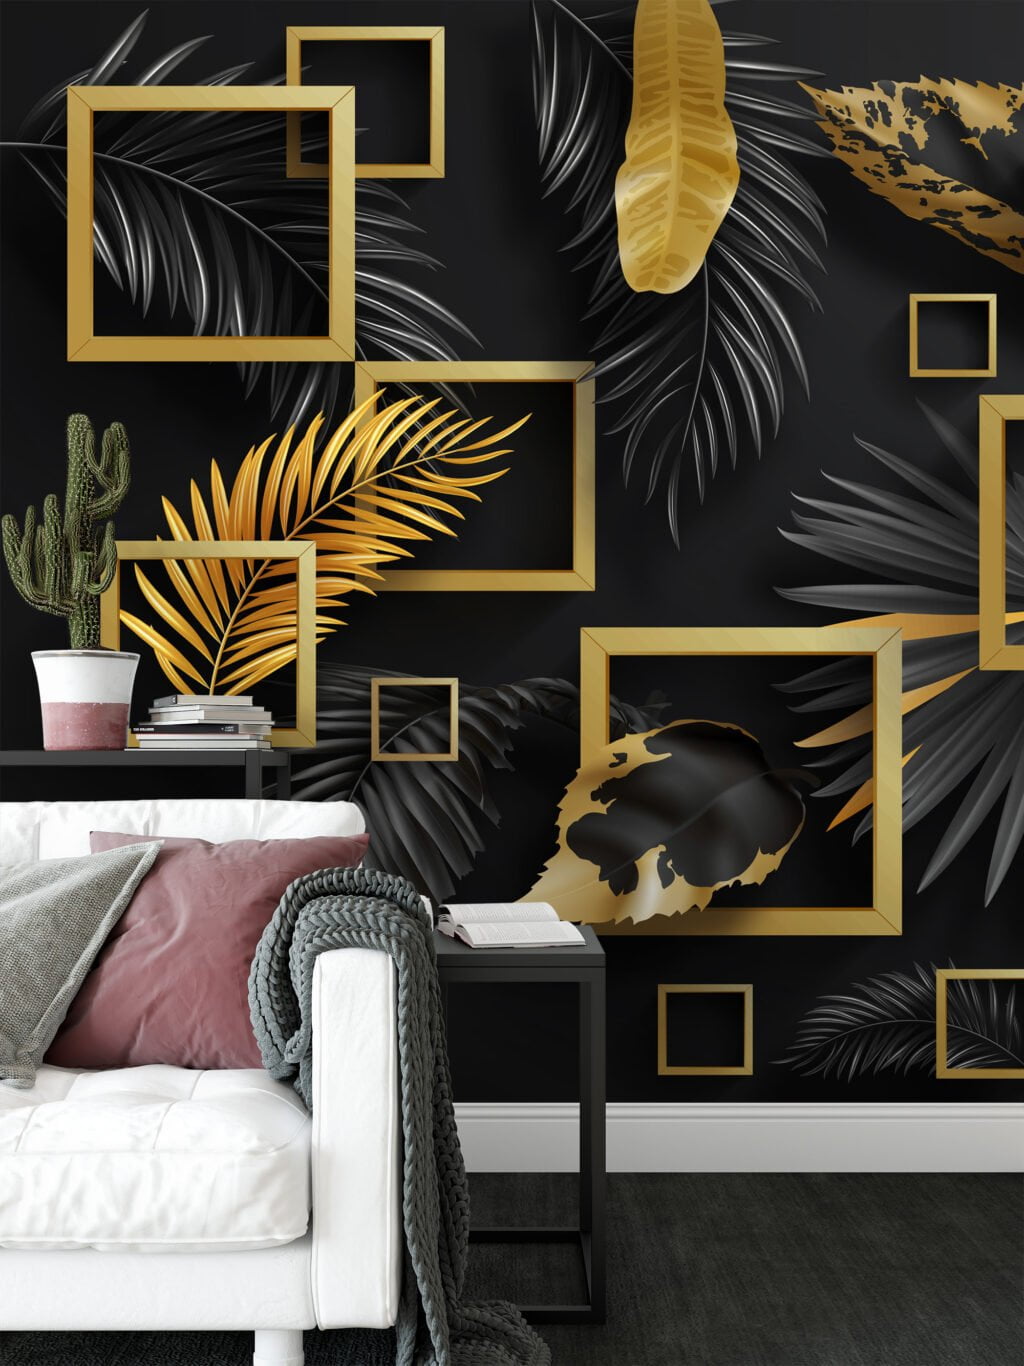 Geometric Black And Gold Leaves Wallpaper, Bold and Elegant Peel and Stick Wall Mural, Self Adhesive Removable Wallpaper for Modern Home Decor